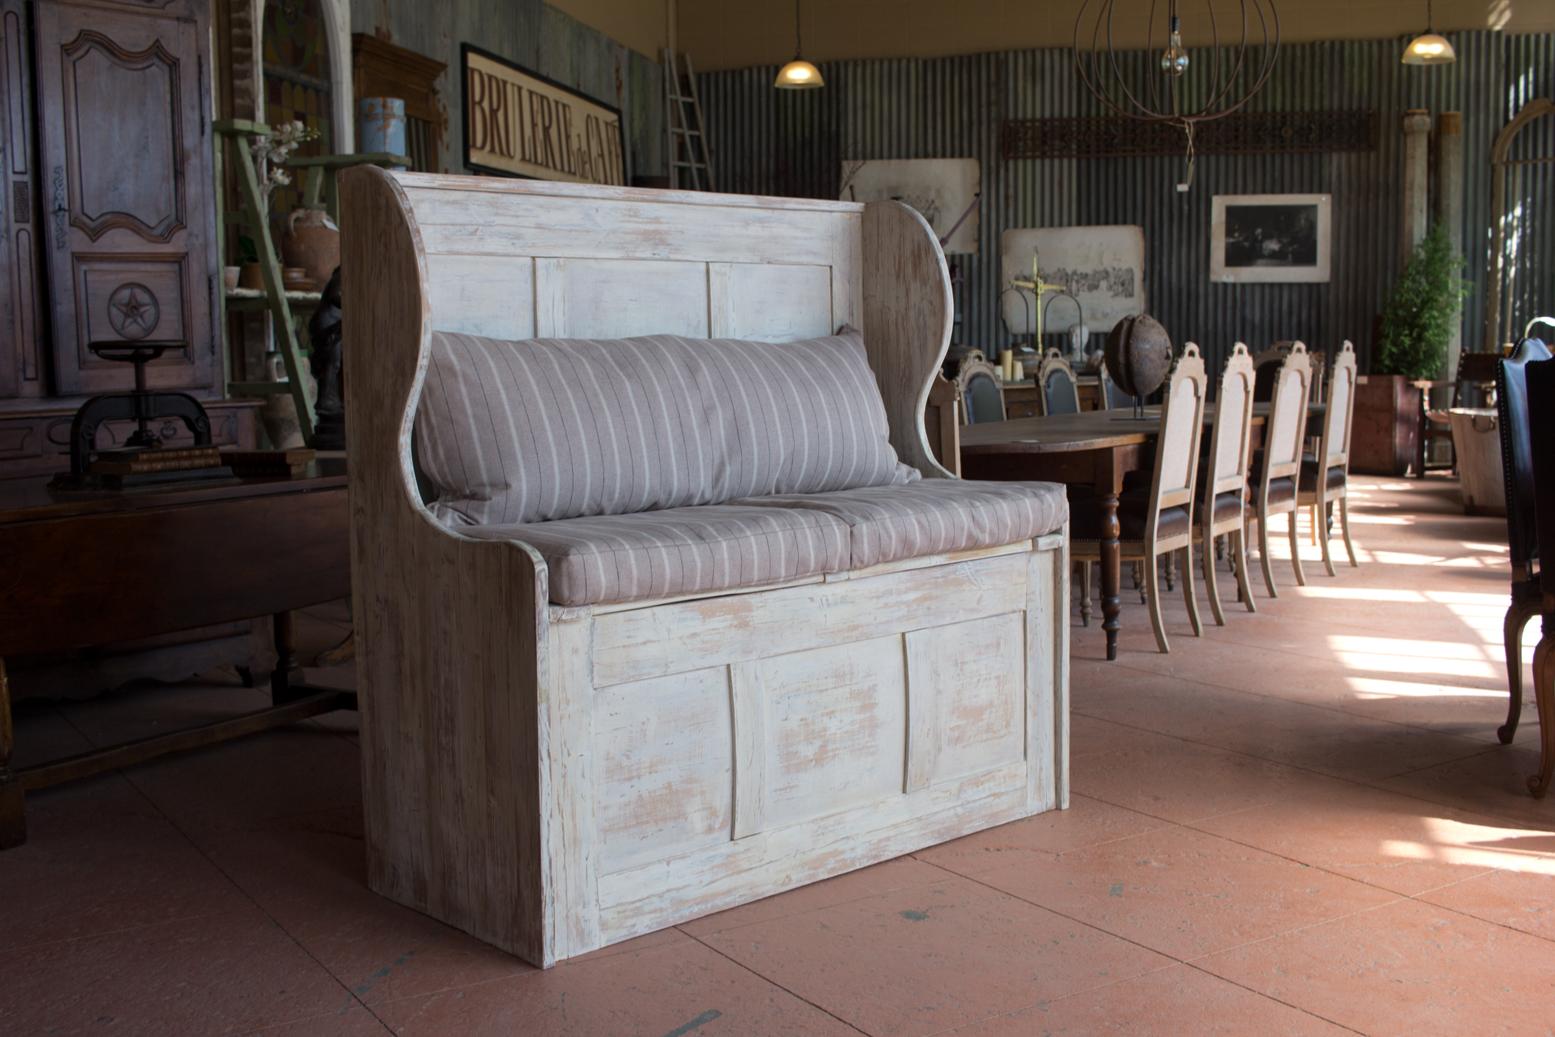 Lovely English vintage scraped back hand-painted pine box settle. Custom cushions and pillow have been made to compliment the style and for ease of lifting each side. Plenty of storage. 

Would look wonderful in a European farmhouse, rustic modern